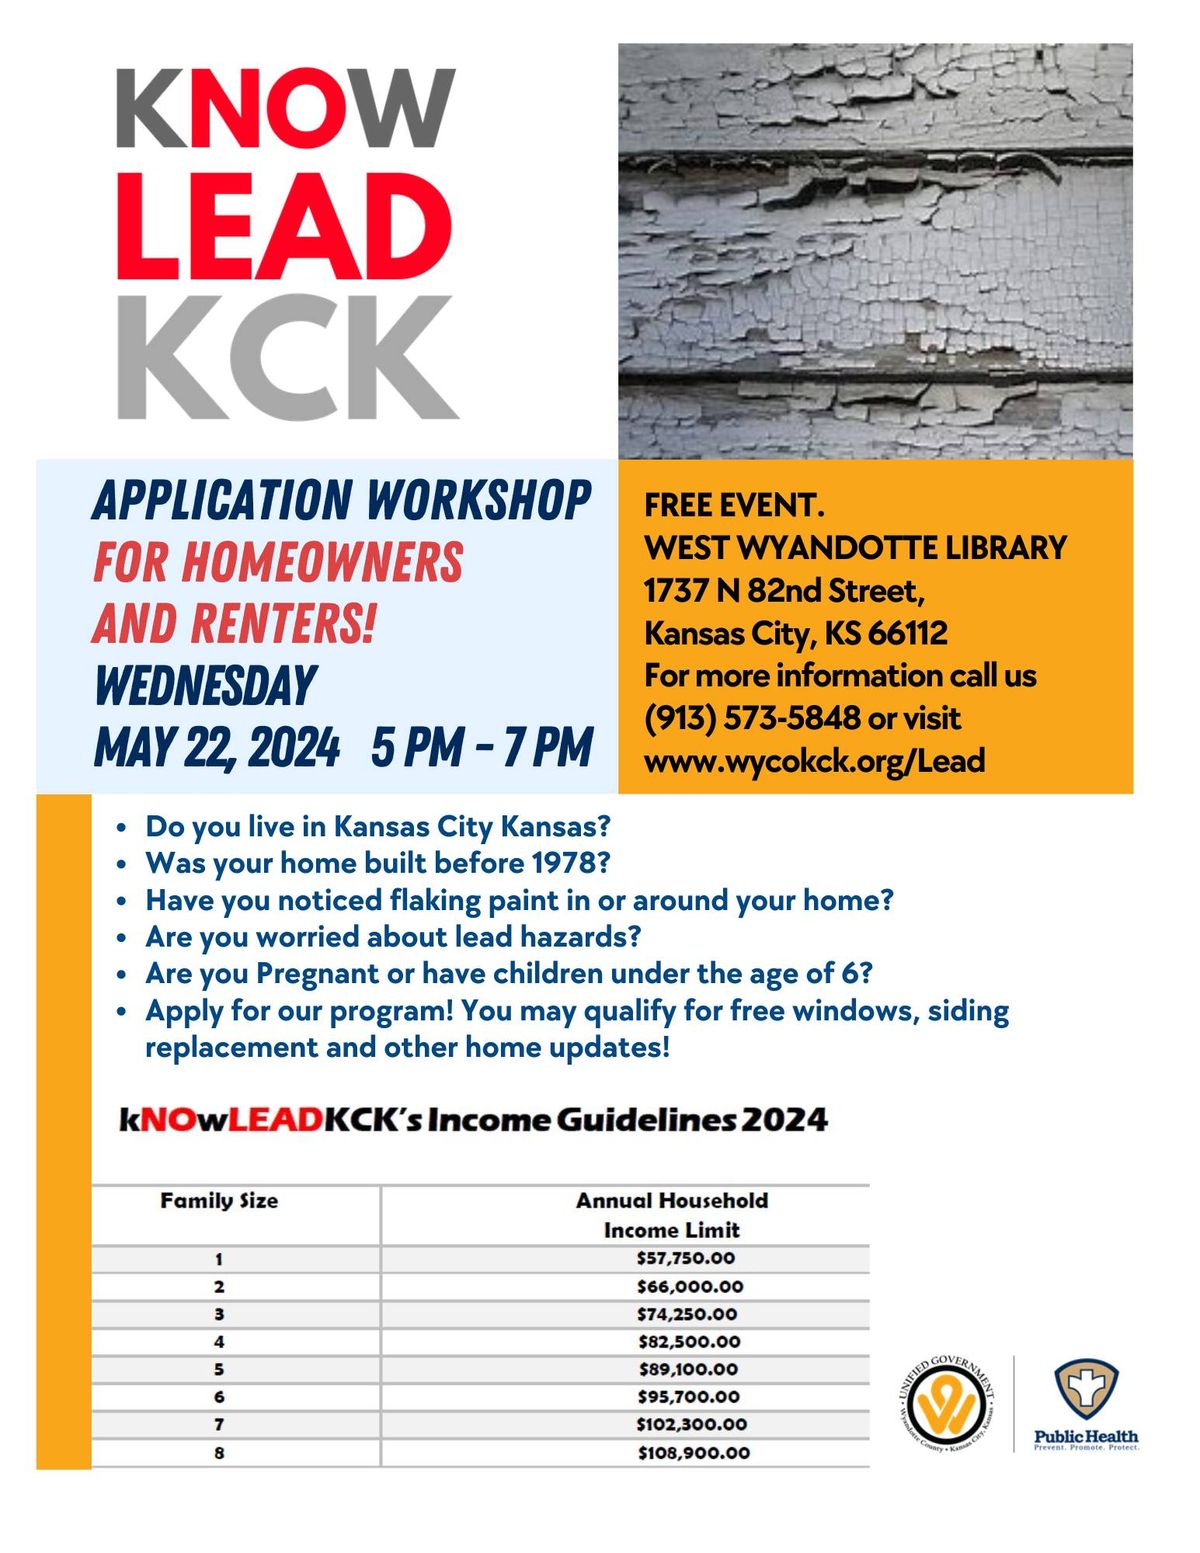 kNOw LEAD KCK - Free Aplication Workshop for Homeowners and Renters